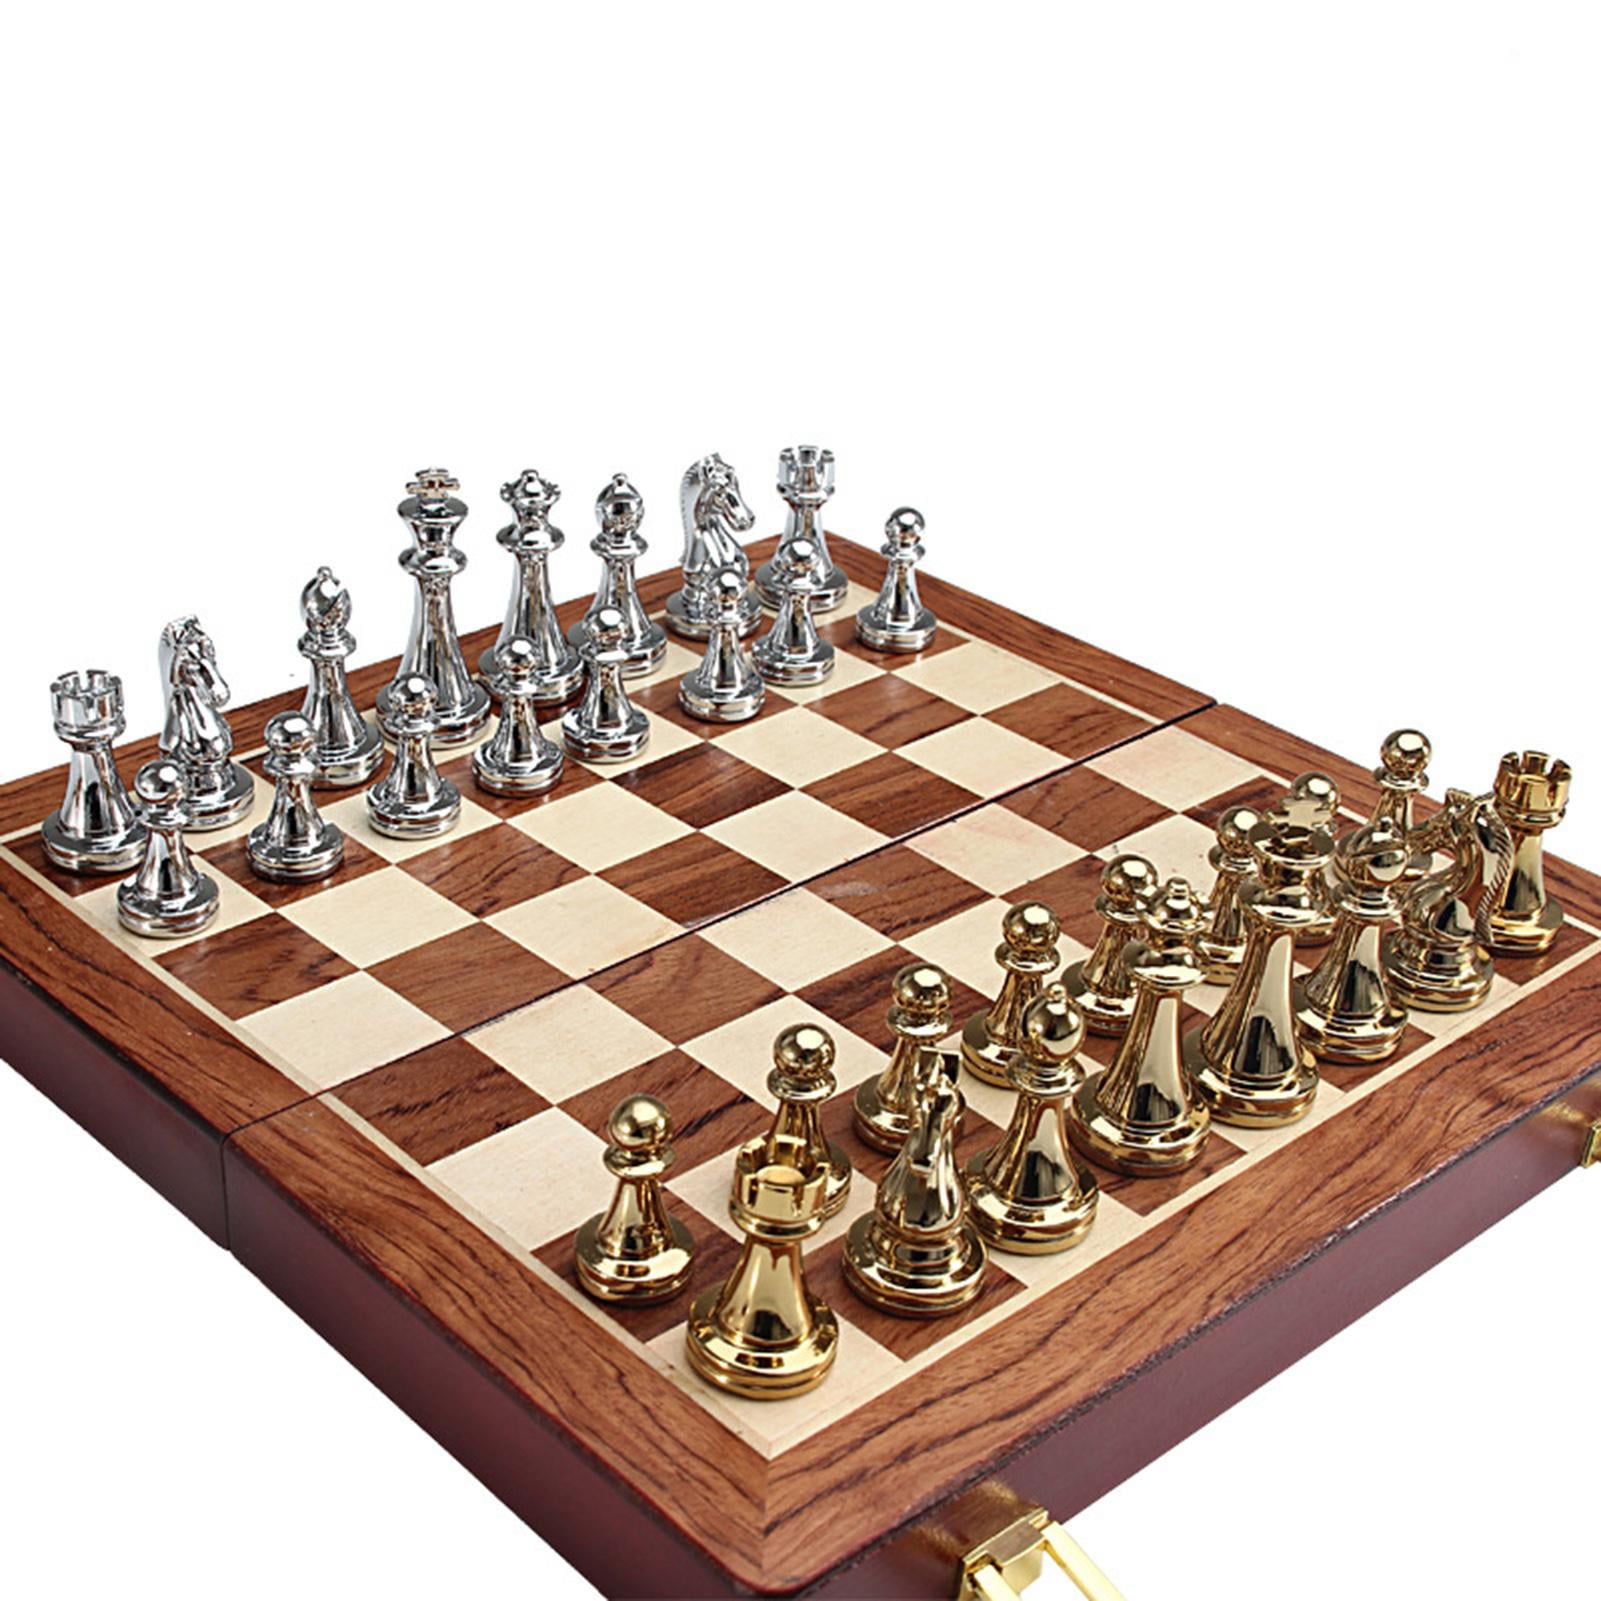 Travel Chess Set Metal Chess Pieces Chess Set wirh Storage Personalized Gifts for Him